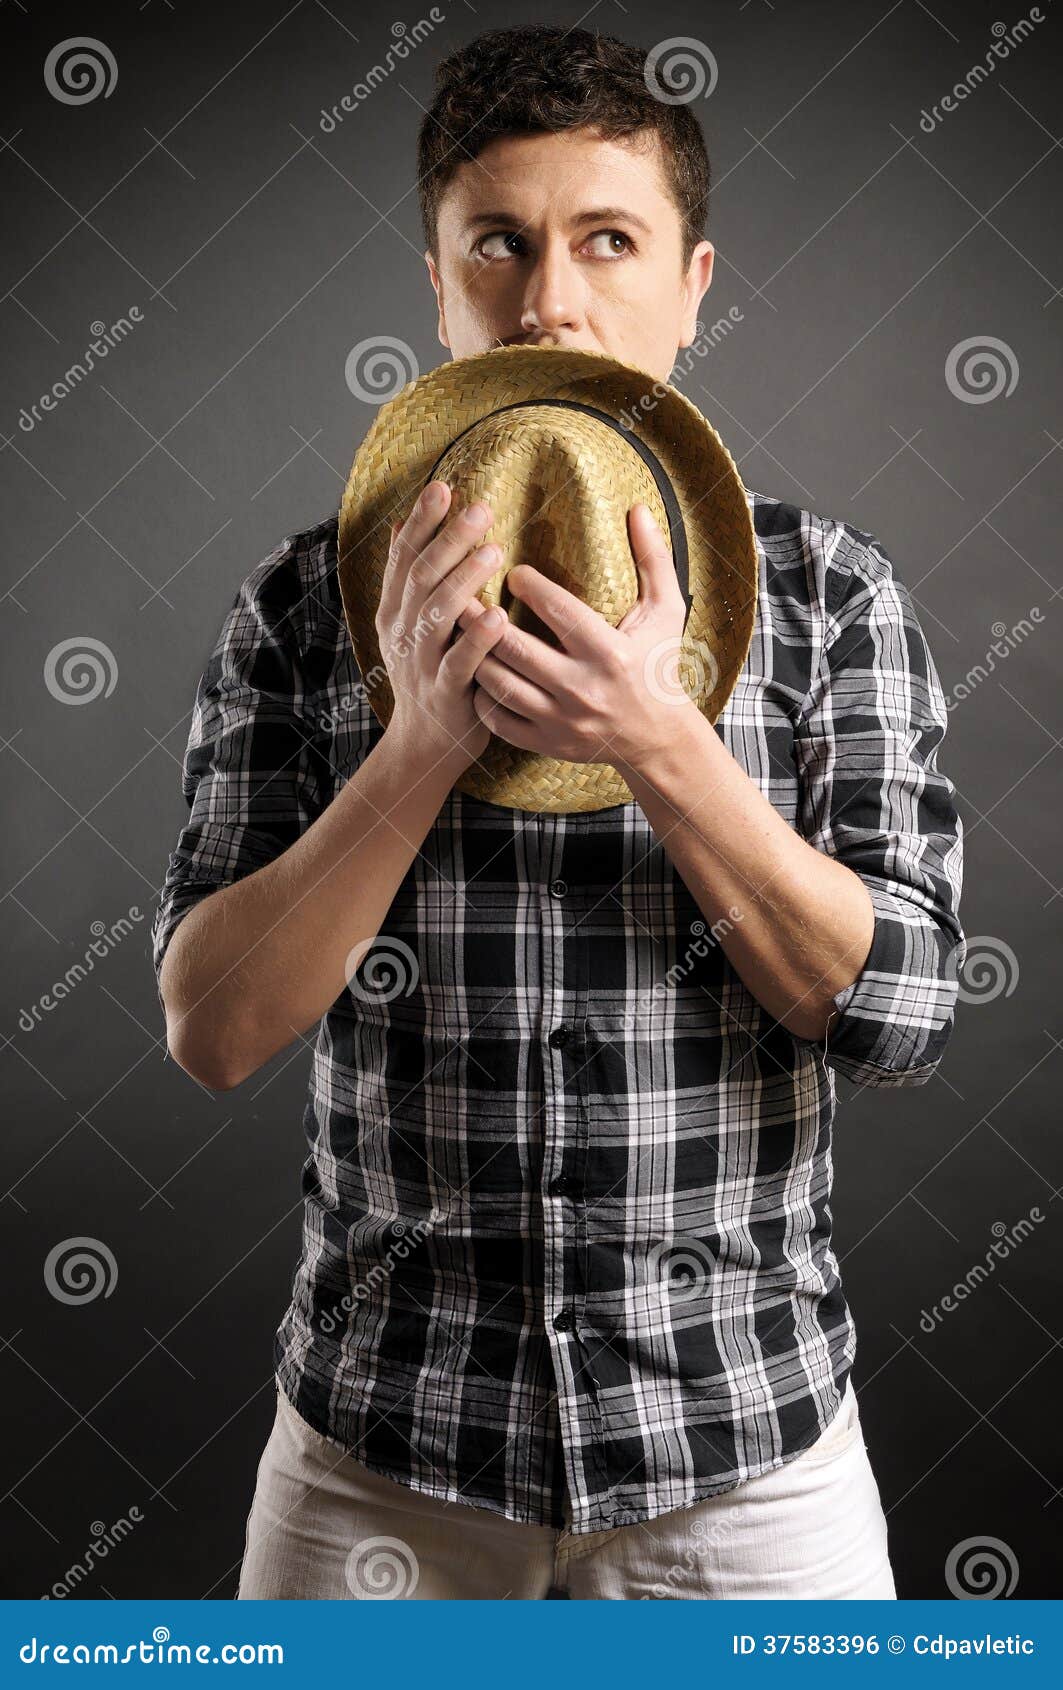 man ashamed covering with a hat